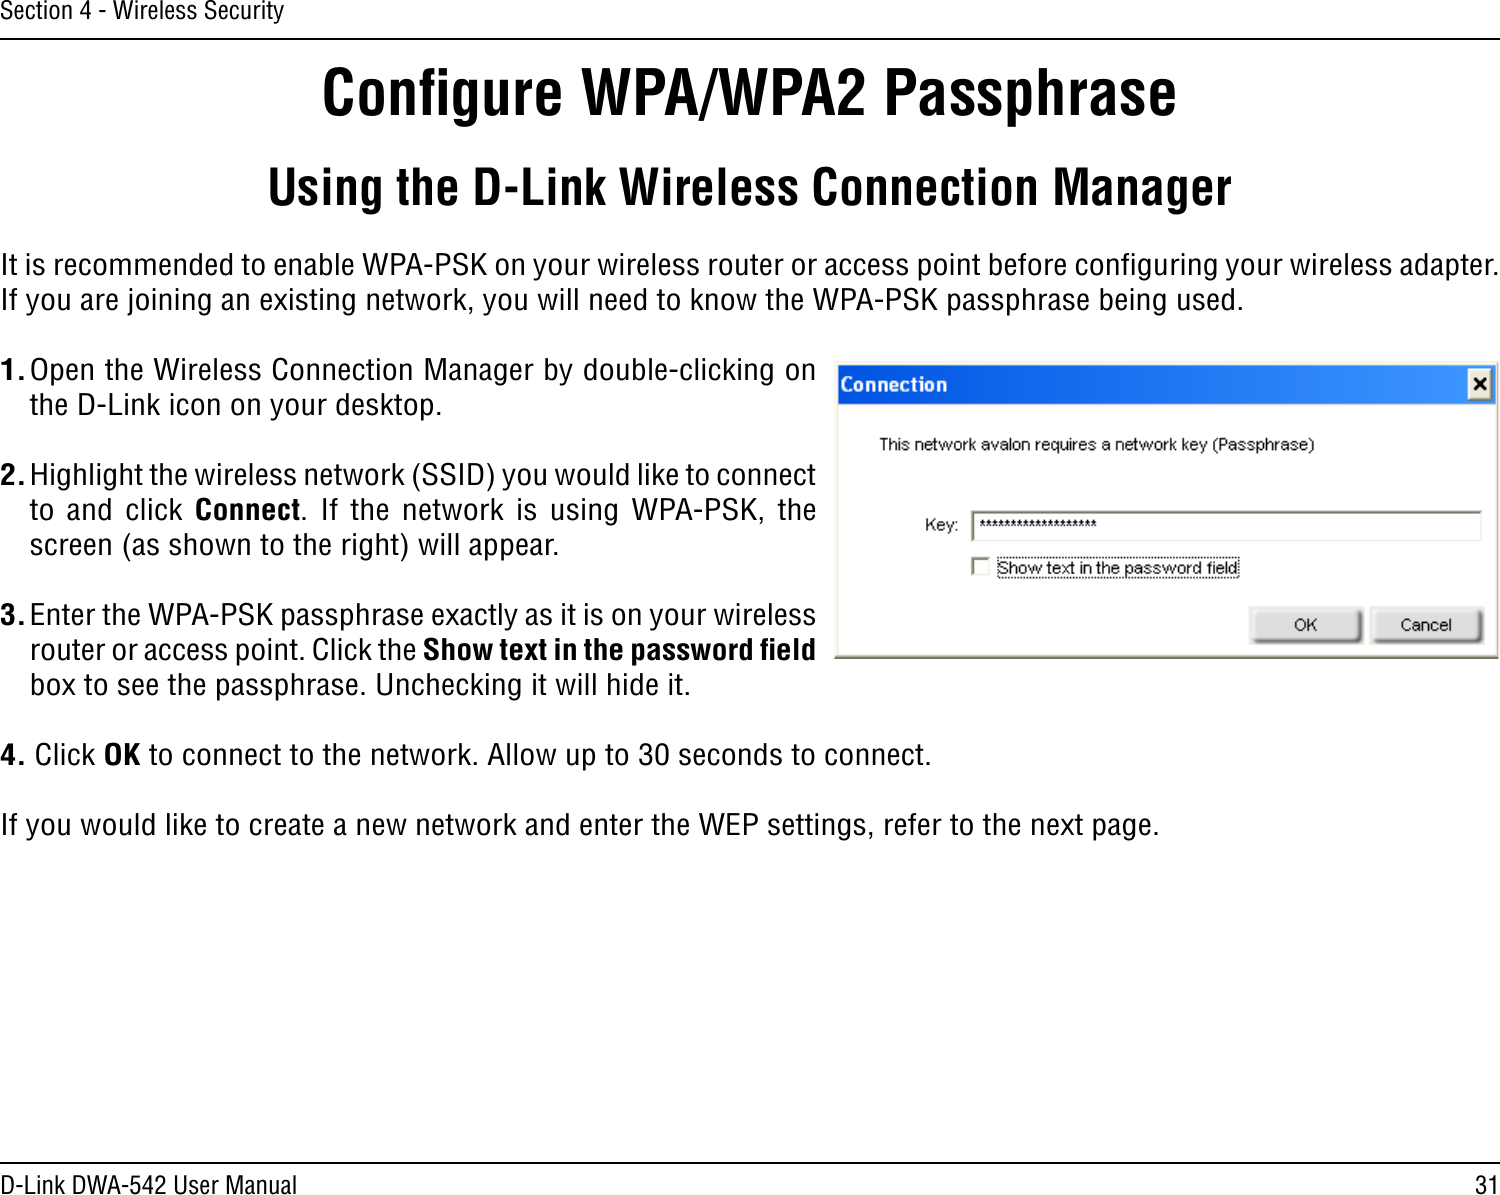 31D-Link DWA-542 User ManualSection 4 - Wireless SecurityConﬁgure WPA/WPA2 PassphraseUsing the D-Link Wireless Connection ManagerIt is recommended to enable WPA-PSK on your wireless router or access point before conﬁguring your wireless adapter. If you are joining an existing network, you will need to know the WPA-PSK passphrase being used.1. Open the Wireless Connection Manager by double-clicking on the D-Link icon on your desktop. 2. Highlight the wireless network (SSID) you would like to connect to  and  click Connect.  If  the  network  is  using  WPA-PSK,  the screen (as shown to the right) will appear. 3. Enter the WPA-PSK passphrase exactly as it is on your wireless router or access point. Click the Show text in the password ﬁeld box to see the passphrase. Unchecking it will hide it.4. Click OK to connect to the network. Allow up to 30 seconds to connect.If you would like to create a new network and enter the WEP settings, refer to the next page.